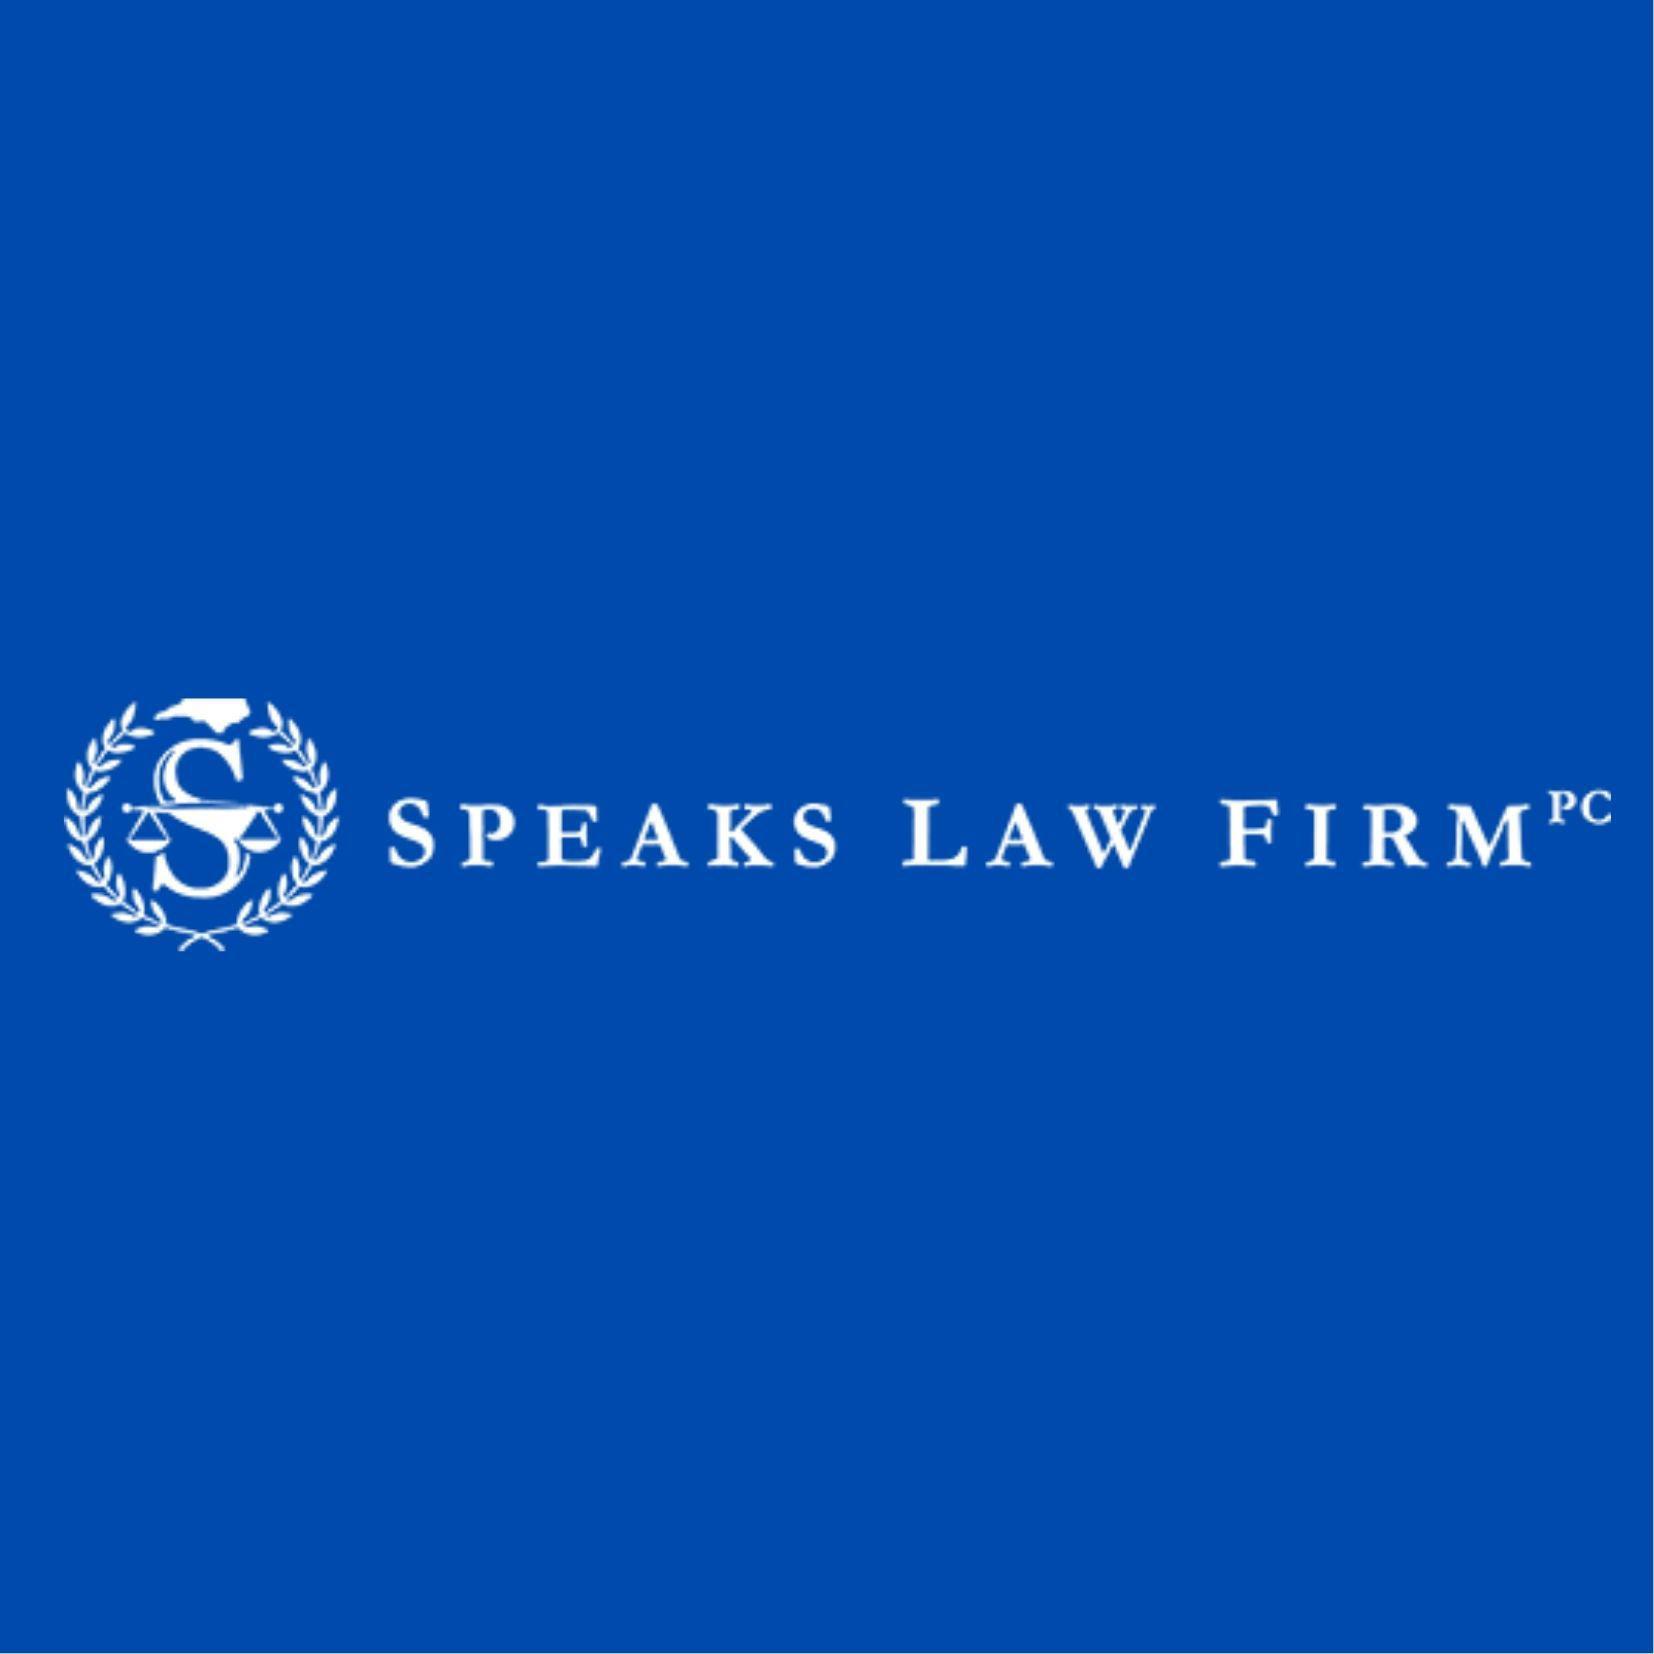 Speaks Law Firm - Wilmington, NC 28401 - (910)341-7570 | ShowMeLocal.com